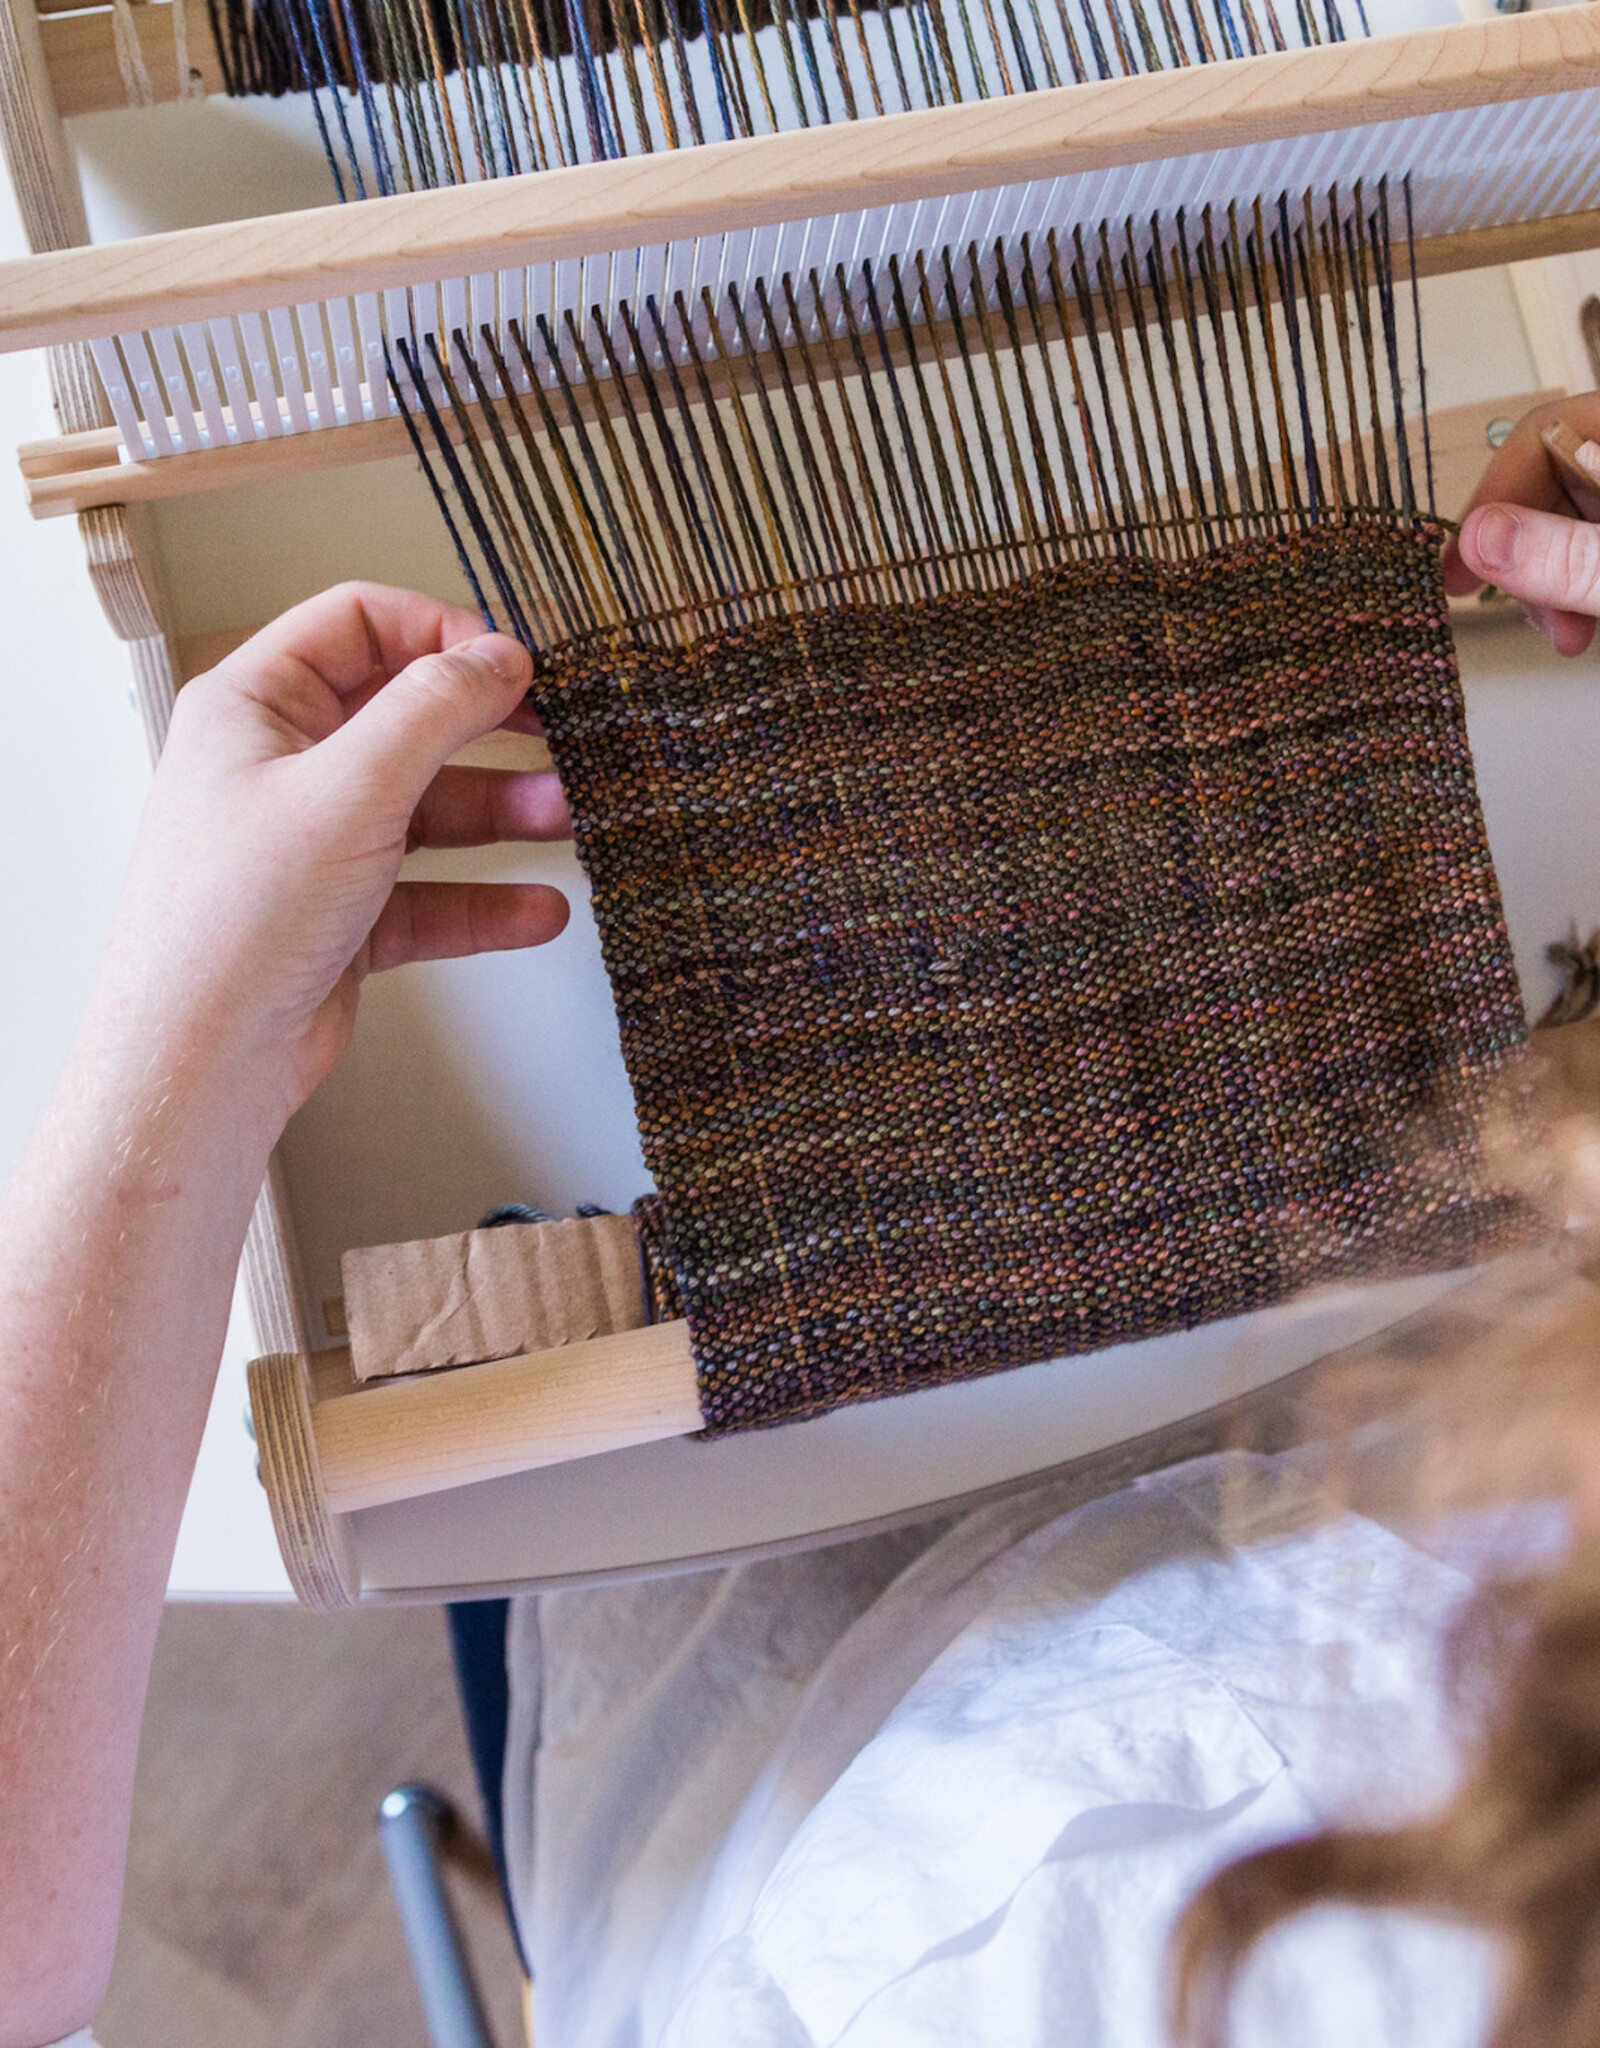 Introduction to Rigid Heddle Weaving